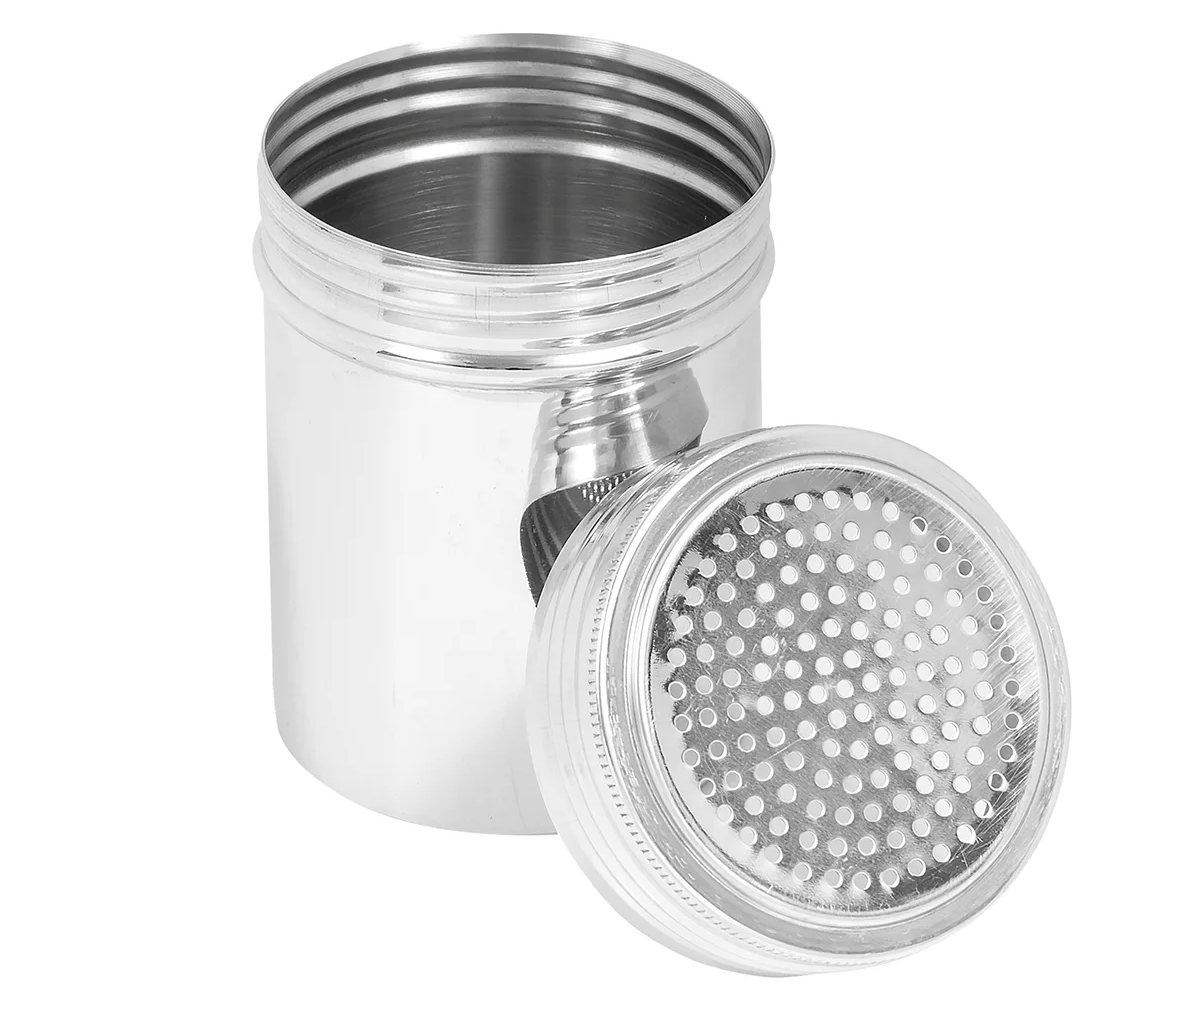 Stainless Steel Shaker – SEEQ